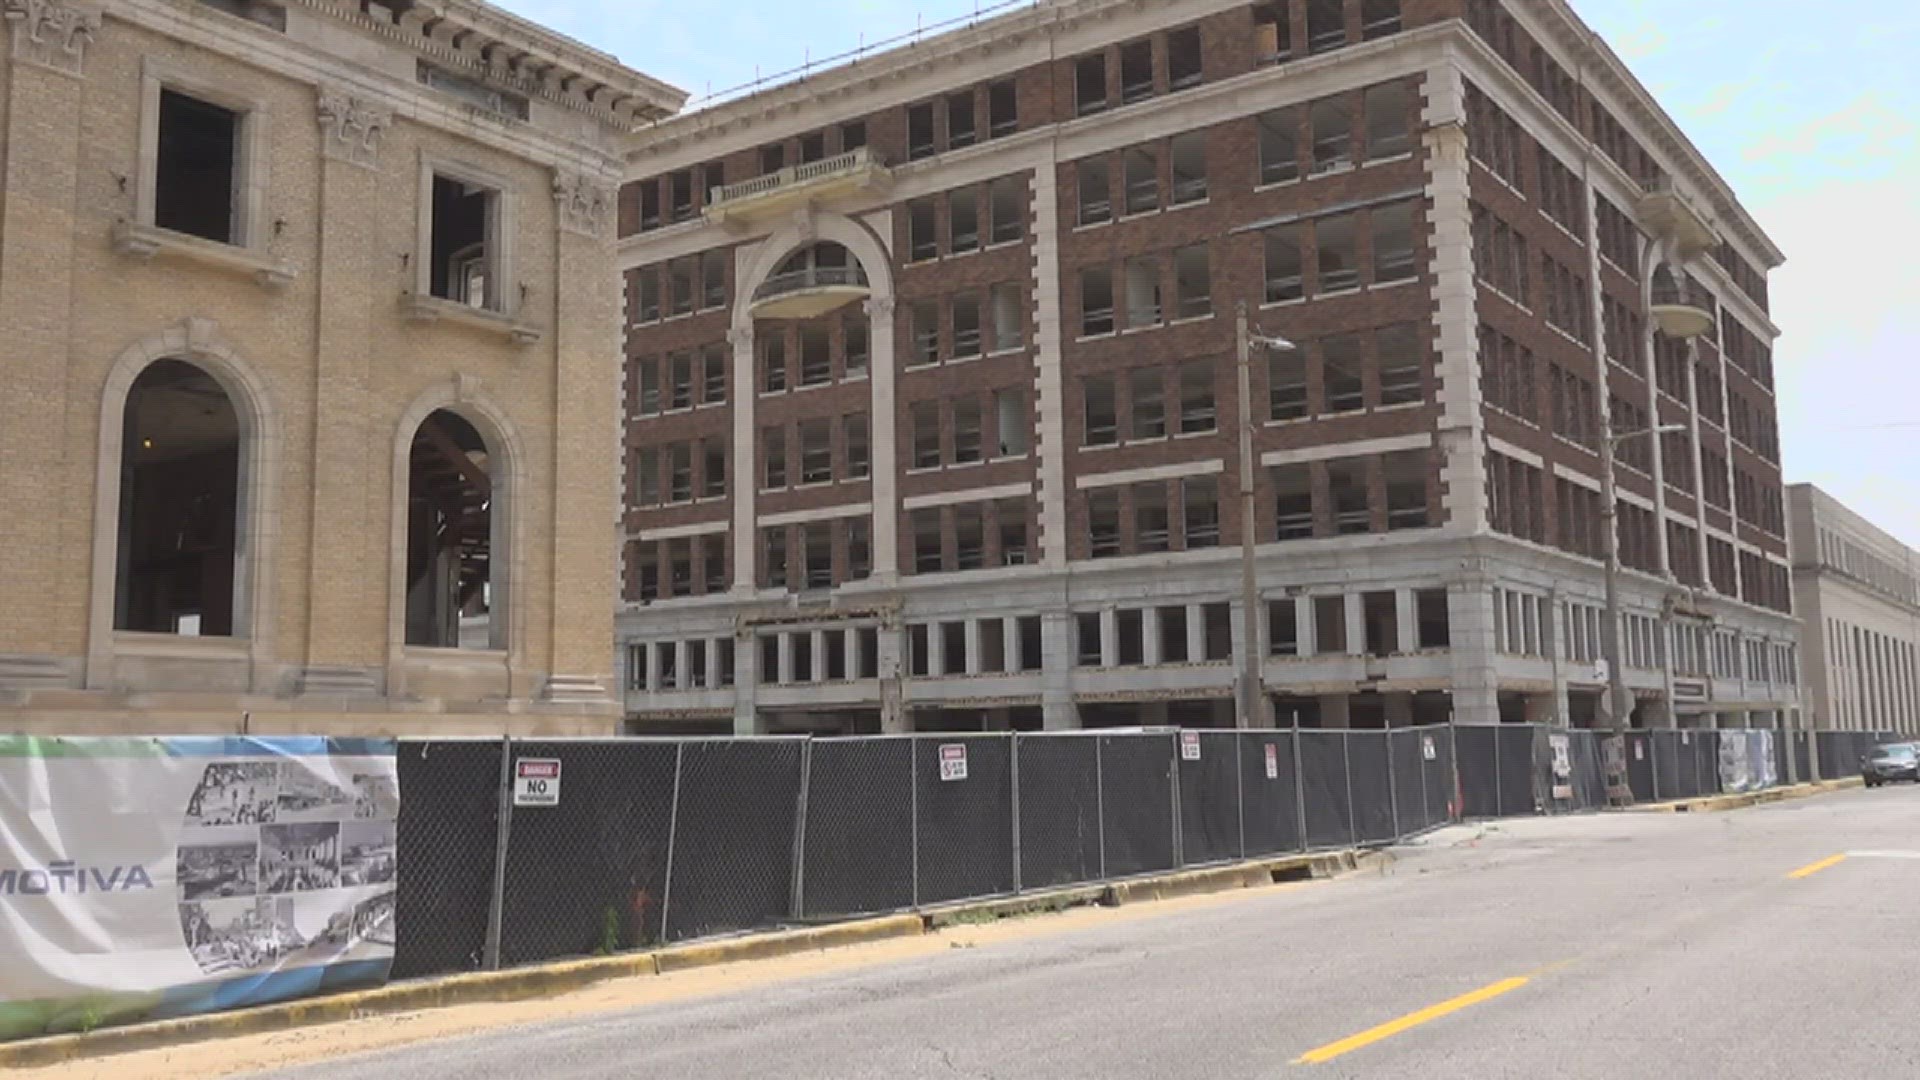 In 2017, Motiva Enterprises LLC bought the properties of the old Post Office and Adams Building in downtown Port Arthur.